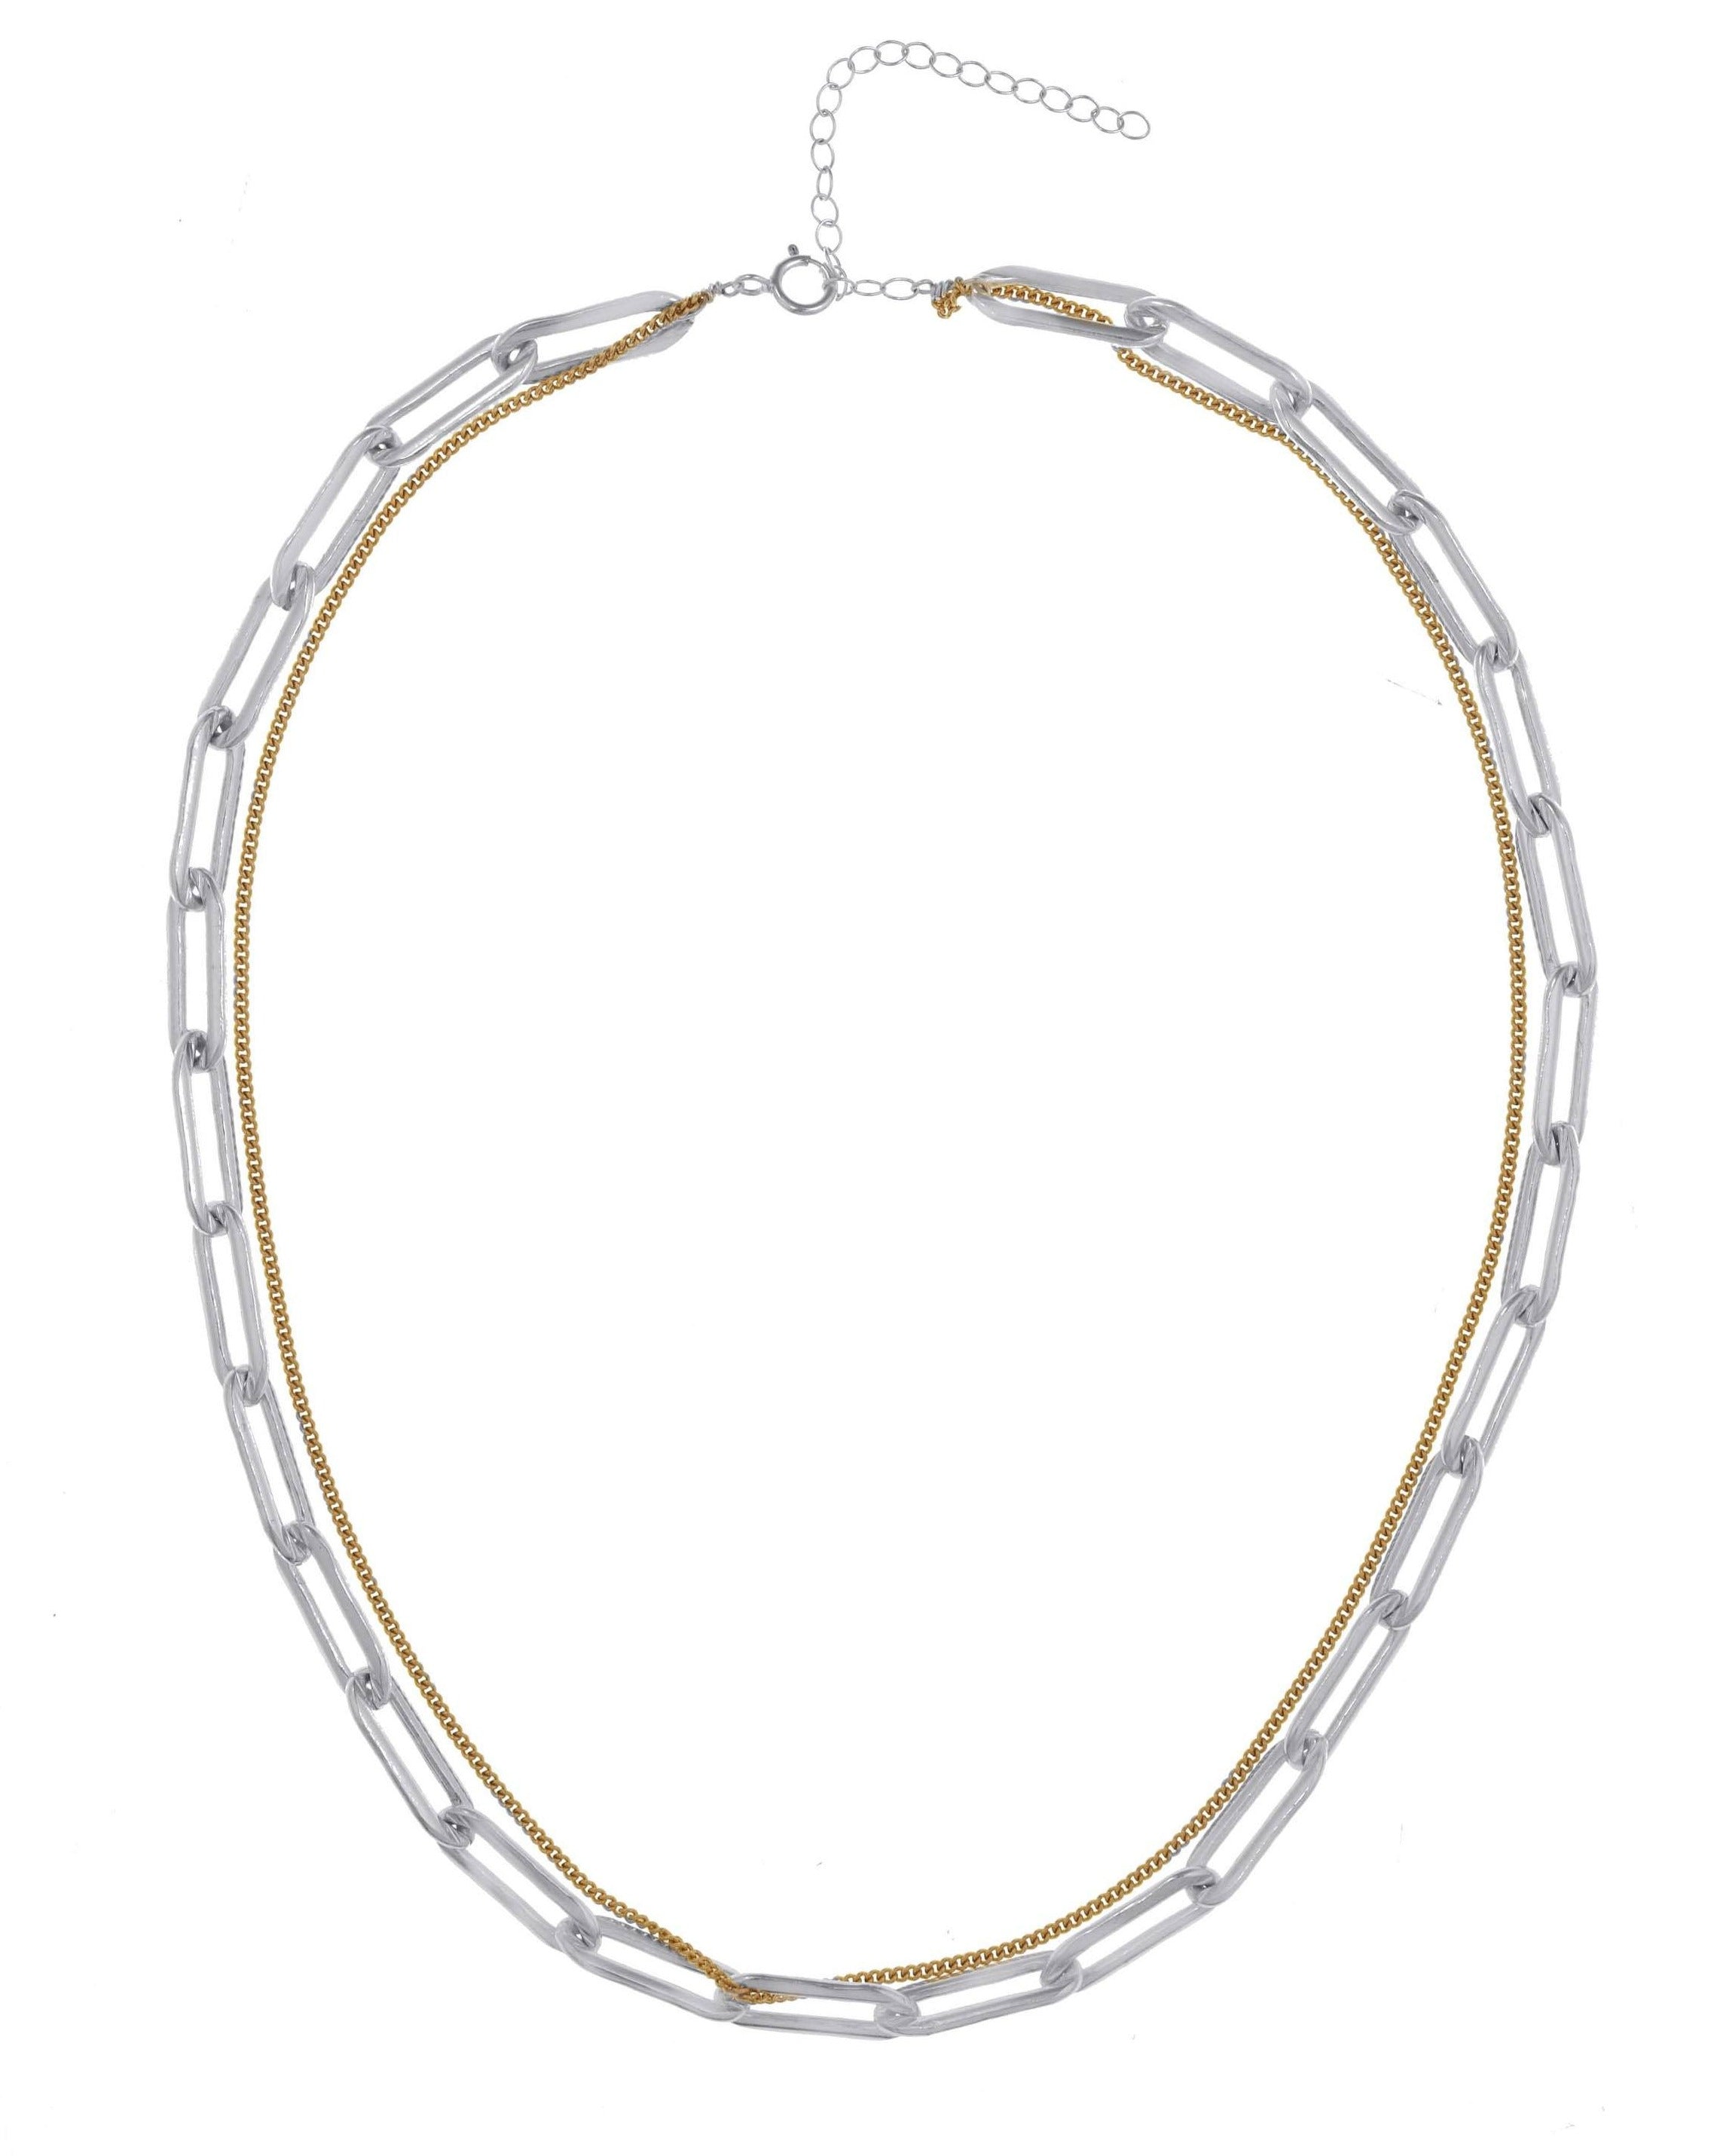 Riley Necklace by KOZAKH. A 14 to 16 inch adjustable length, thin flat link paperclip style chain and 1mm braided chain combo necklace, crafted in 14K Gold Filled and Sterling Silver. 